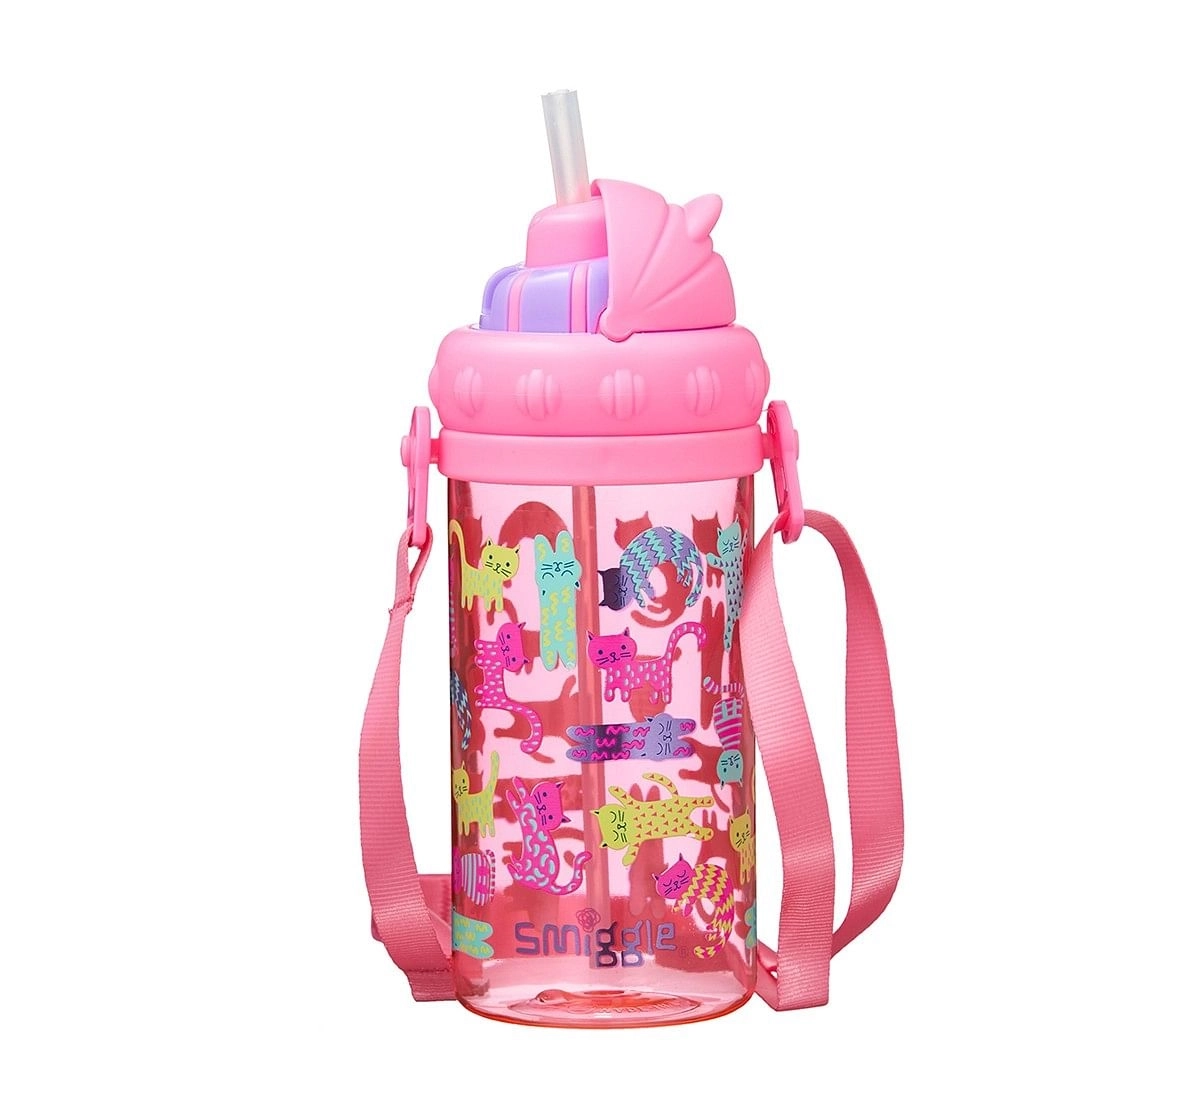 Smiggle Topsy Teeny Tiny Drink Bottle with Strap - Cat Print Bags for Kids age 3Y+ (Pink)